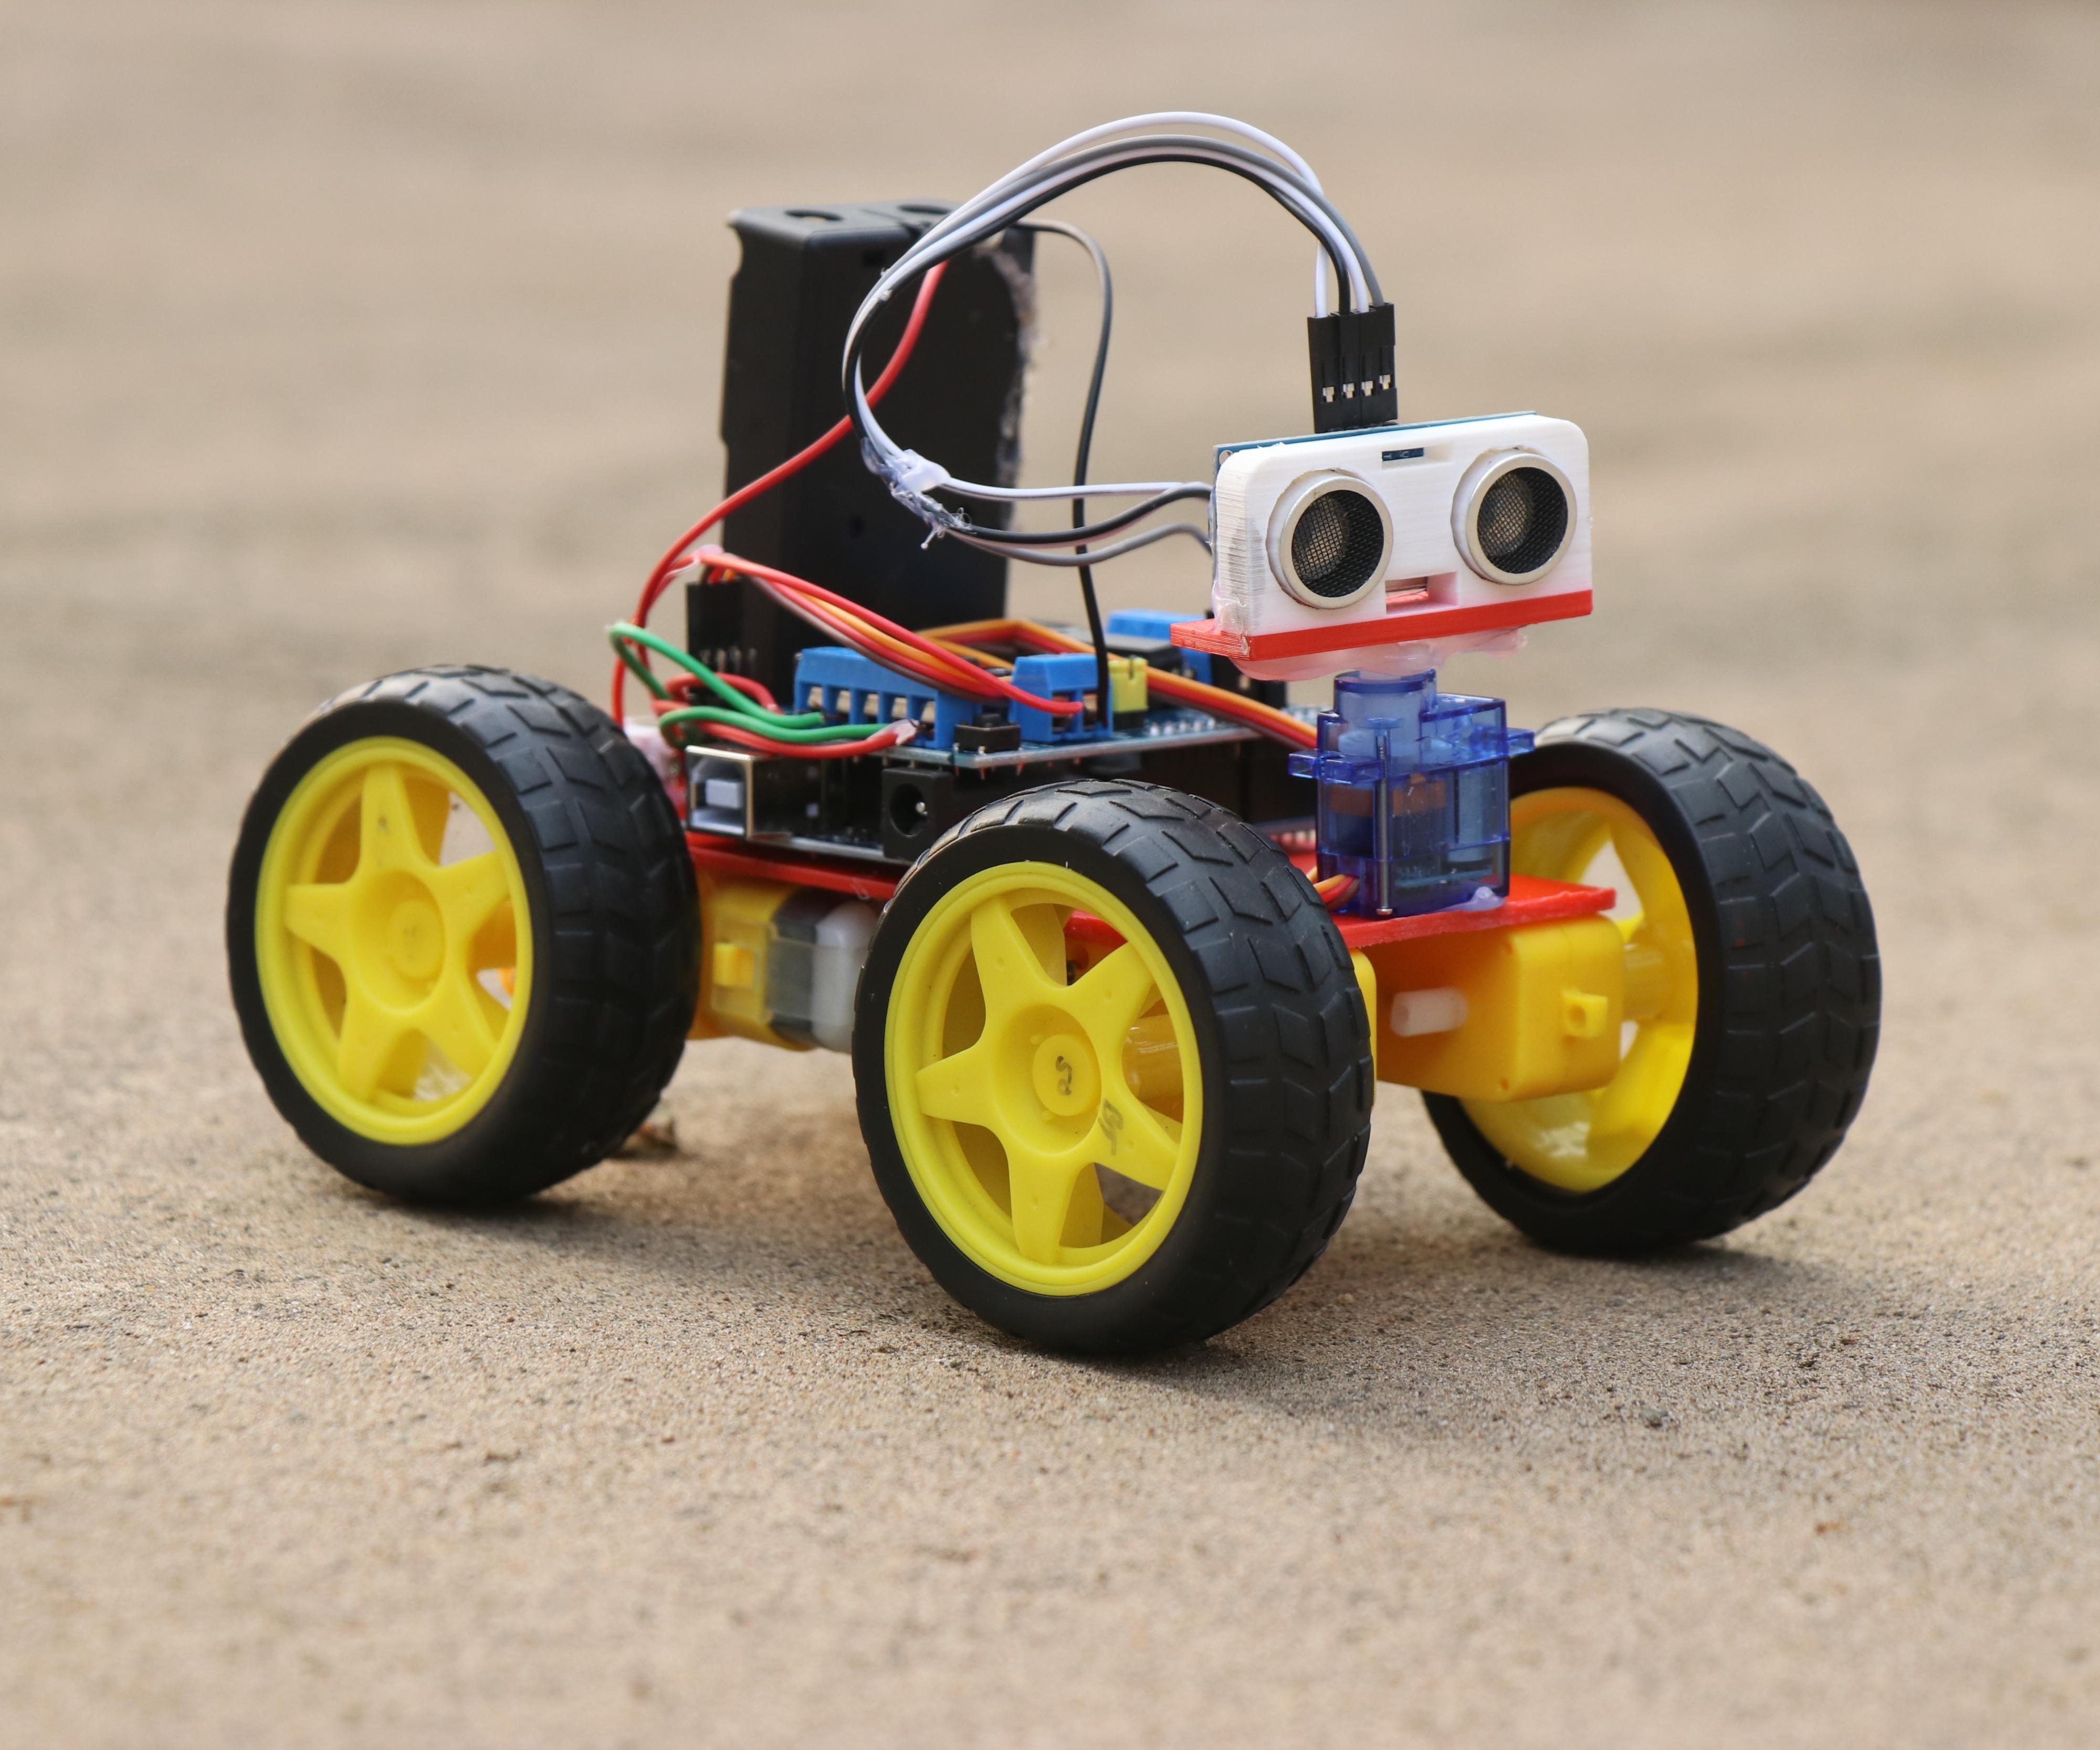 How to Make Obstacle Avoiding Car Using Arduino